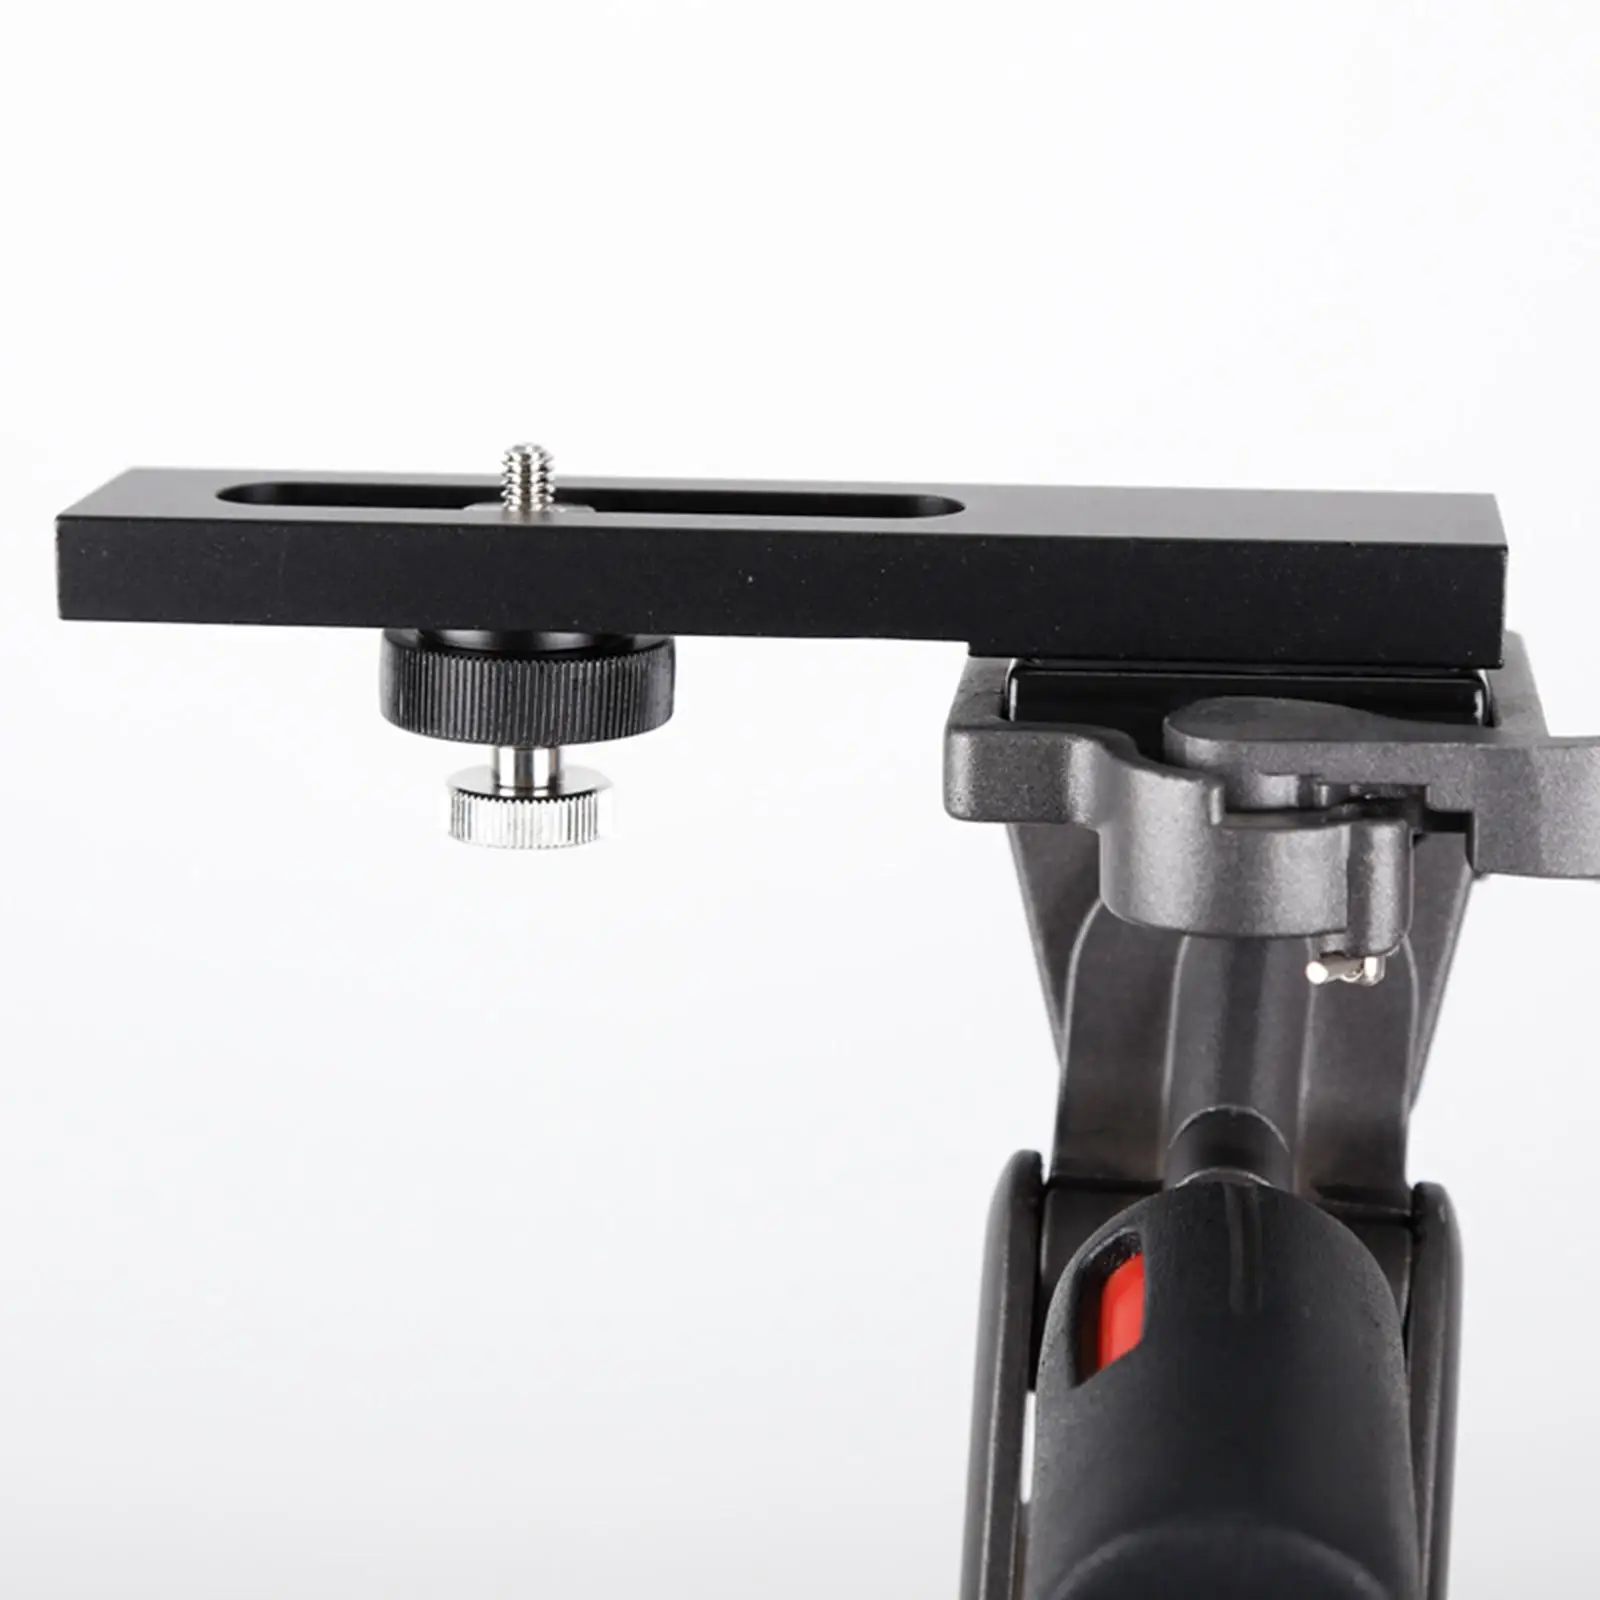 Dovetail Mount Plate Adapter Astronomical Telescope Accessories Easily Install